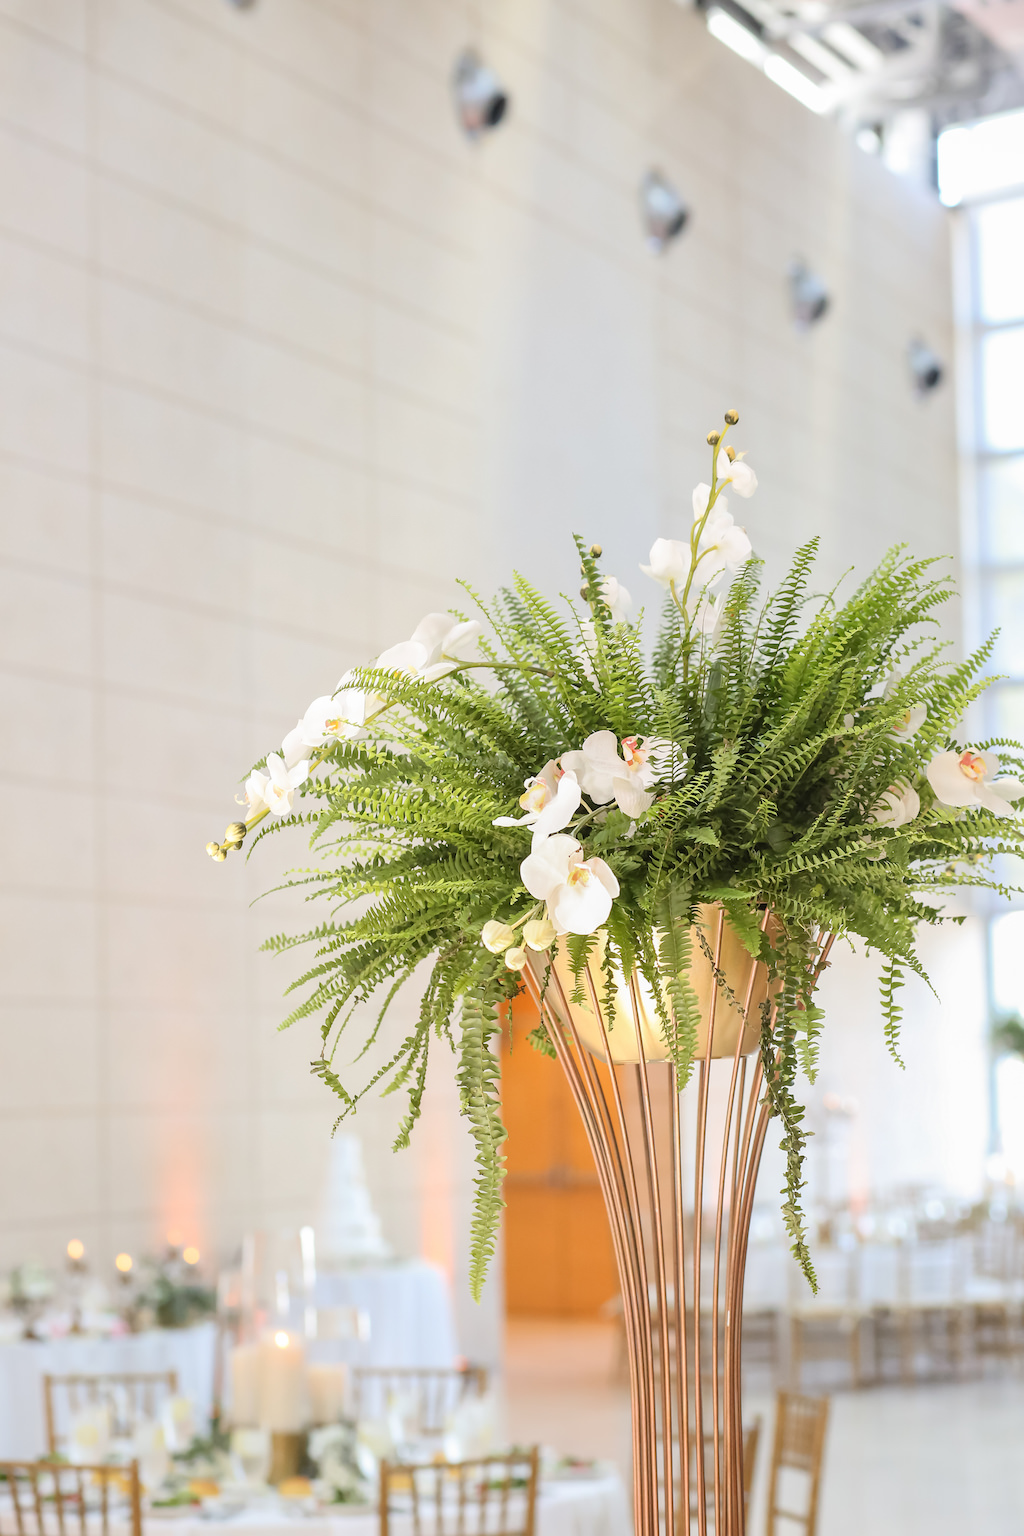 Wedding Reception Decor, Tall Gold Geometric Vase with Greenery and White Orchids Centerpiece | St. Petersburg Photographer Lifelong Photography Studios